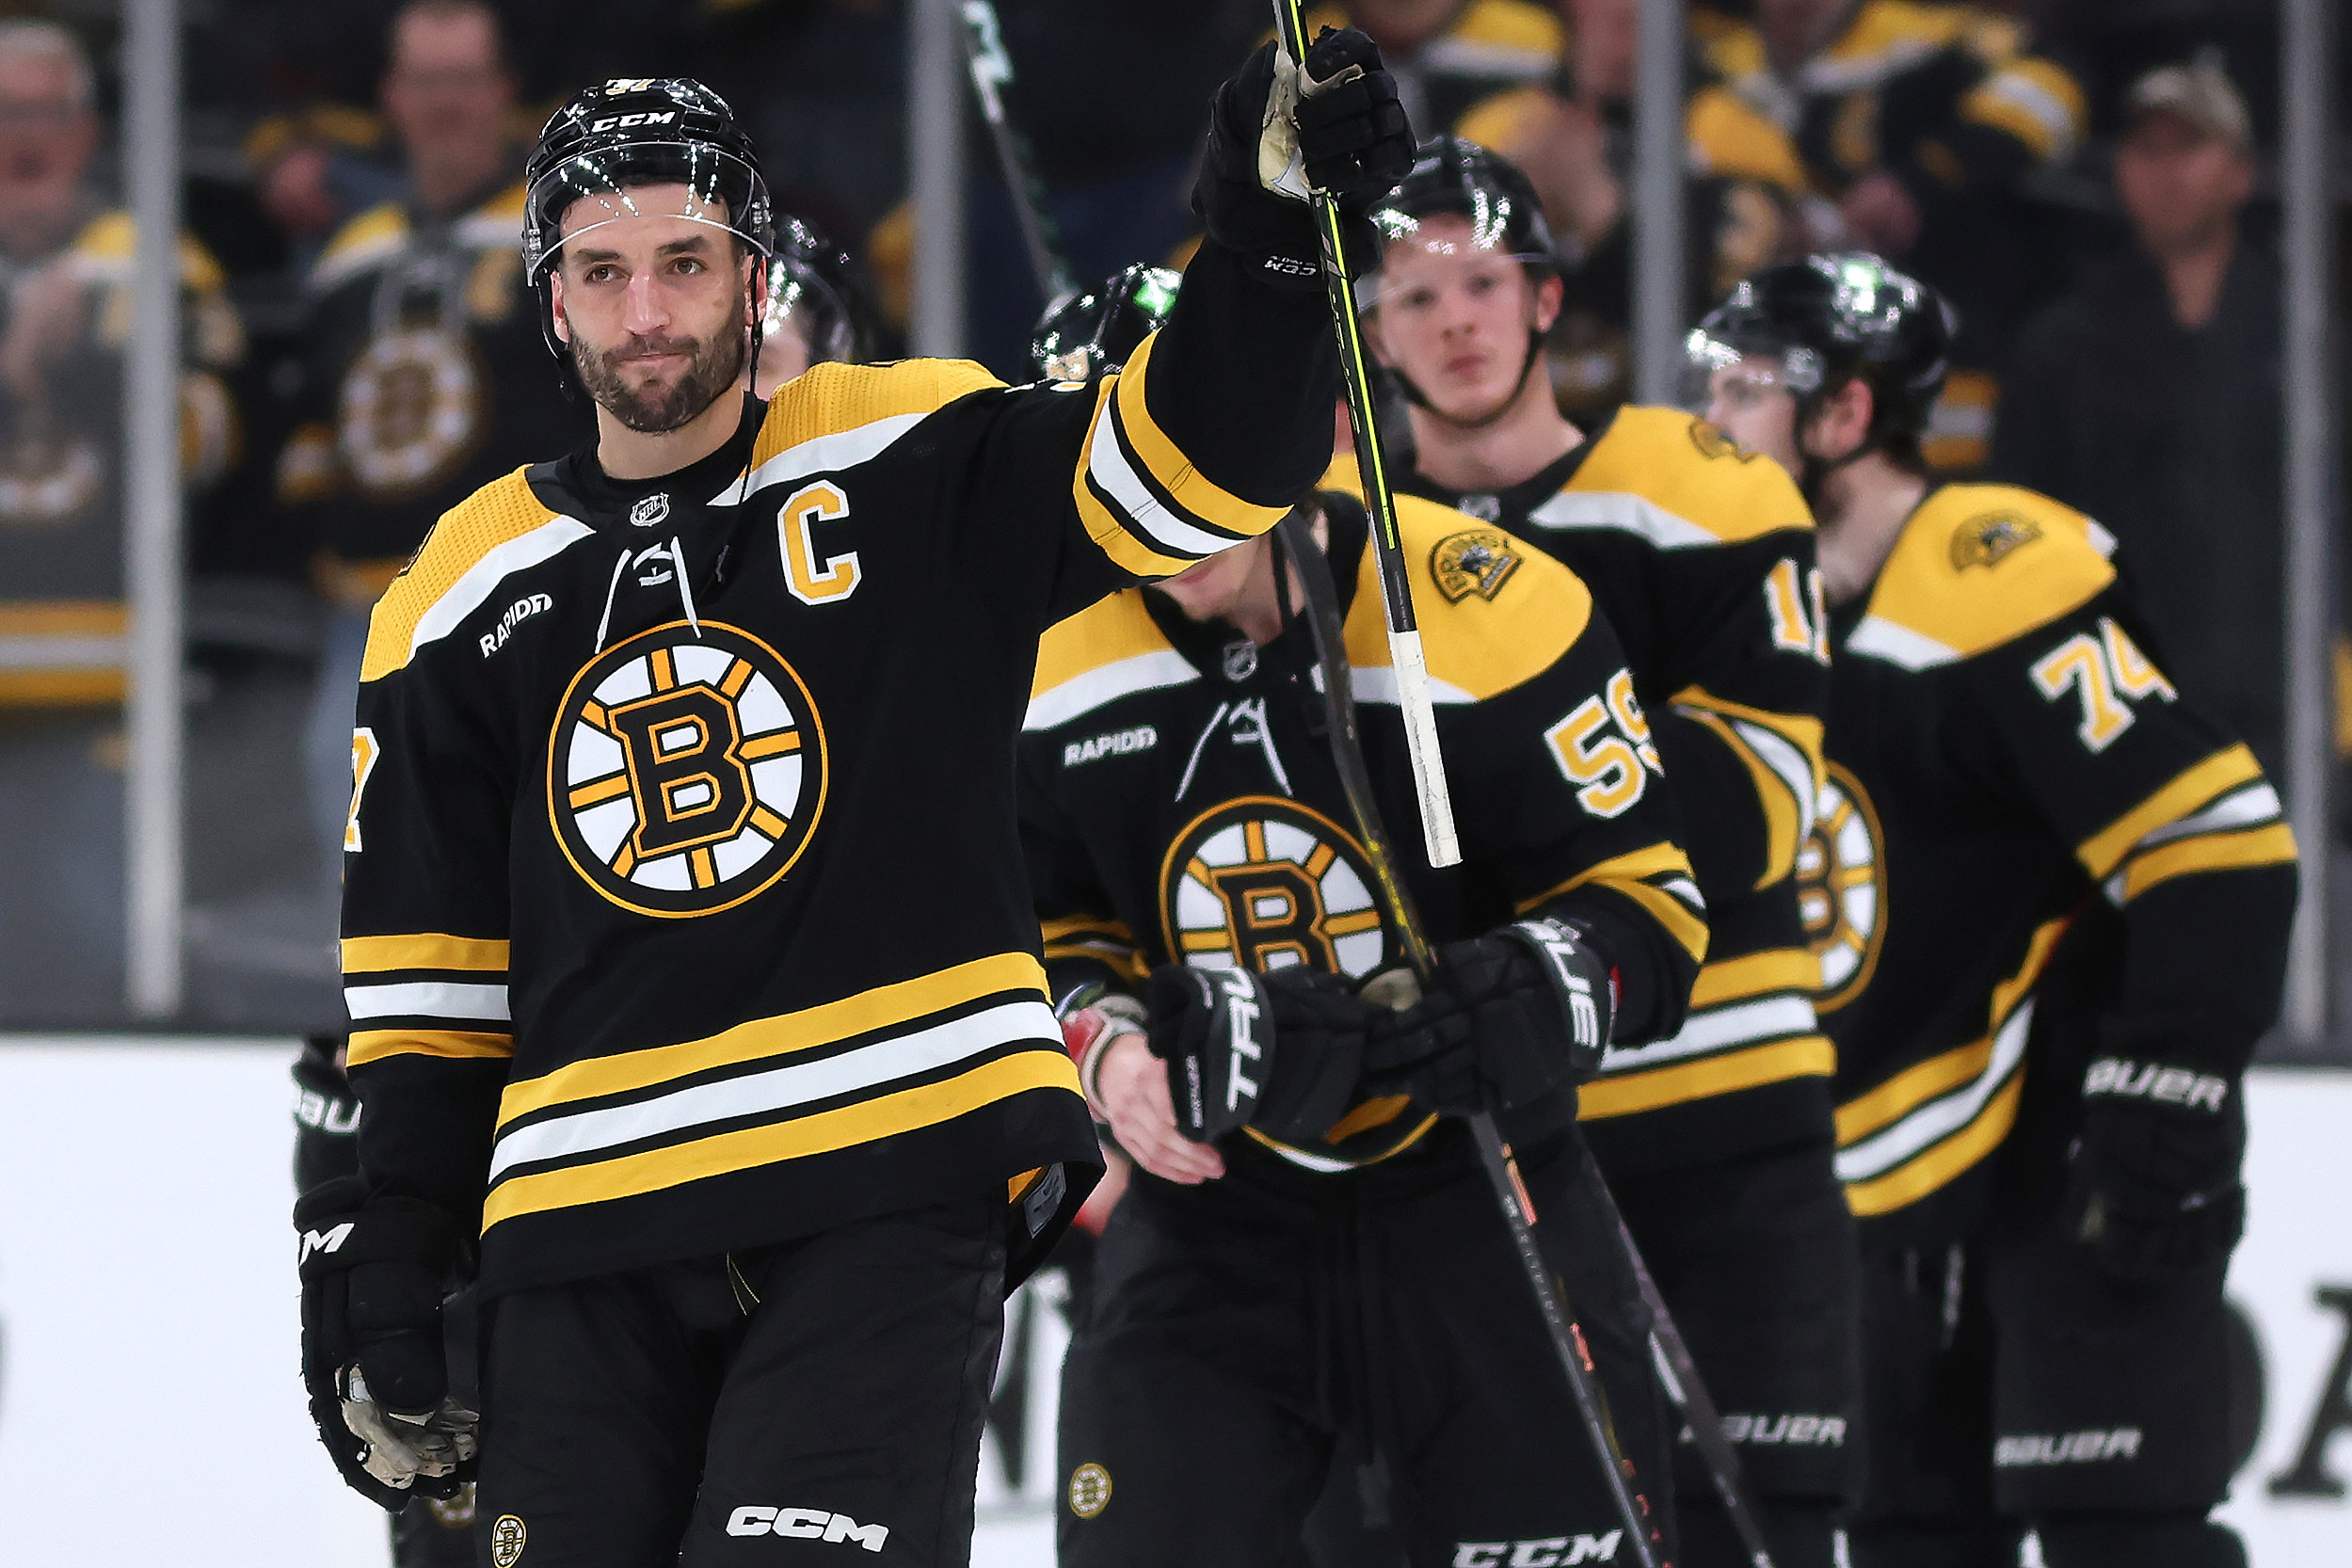 BREAKING: Patrice Bergeron announces retirement from Bruins, Sports